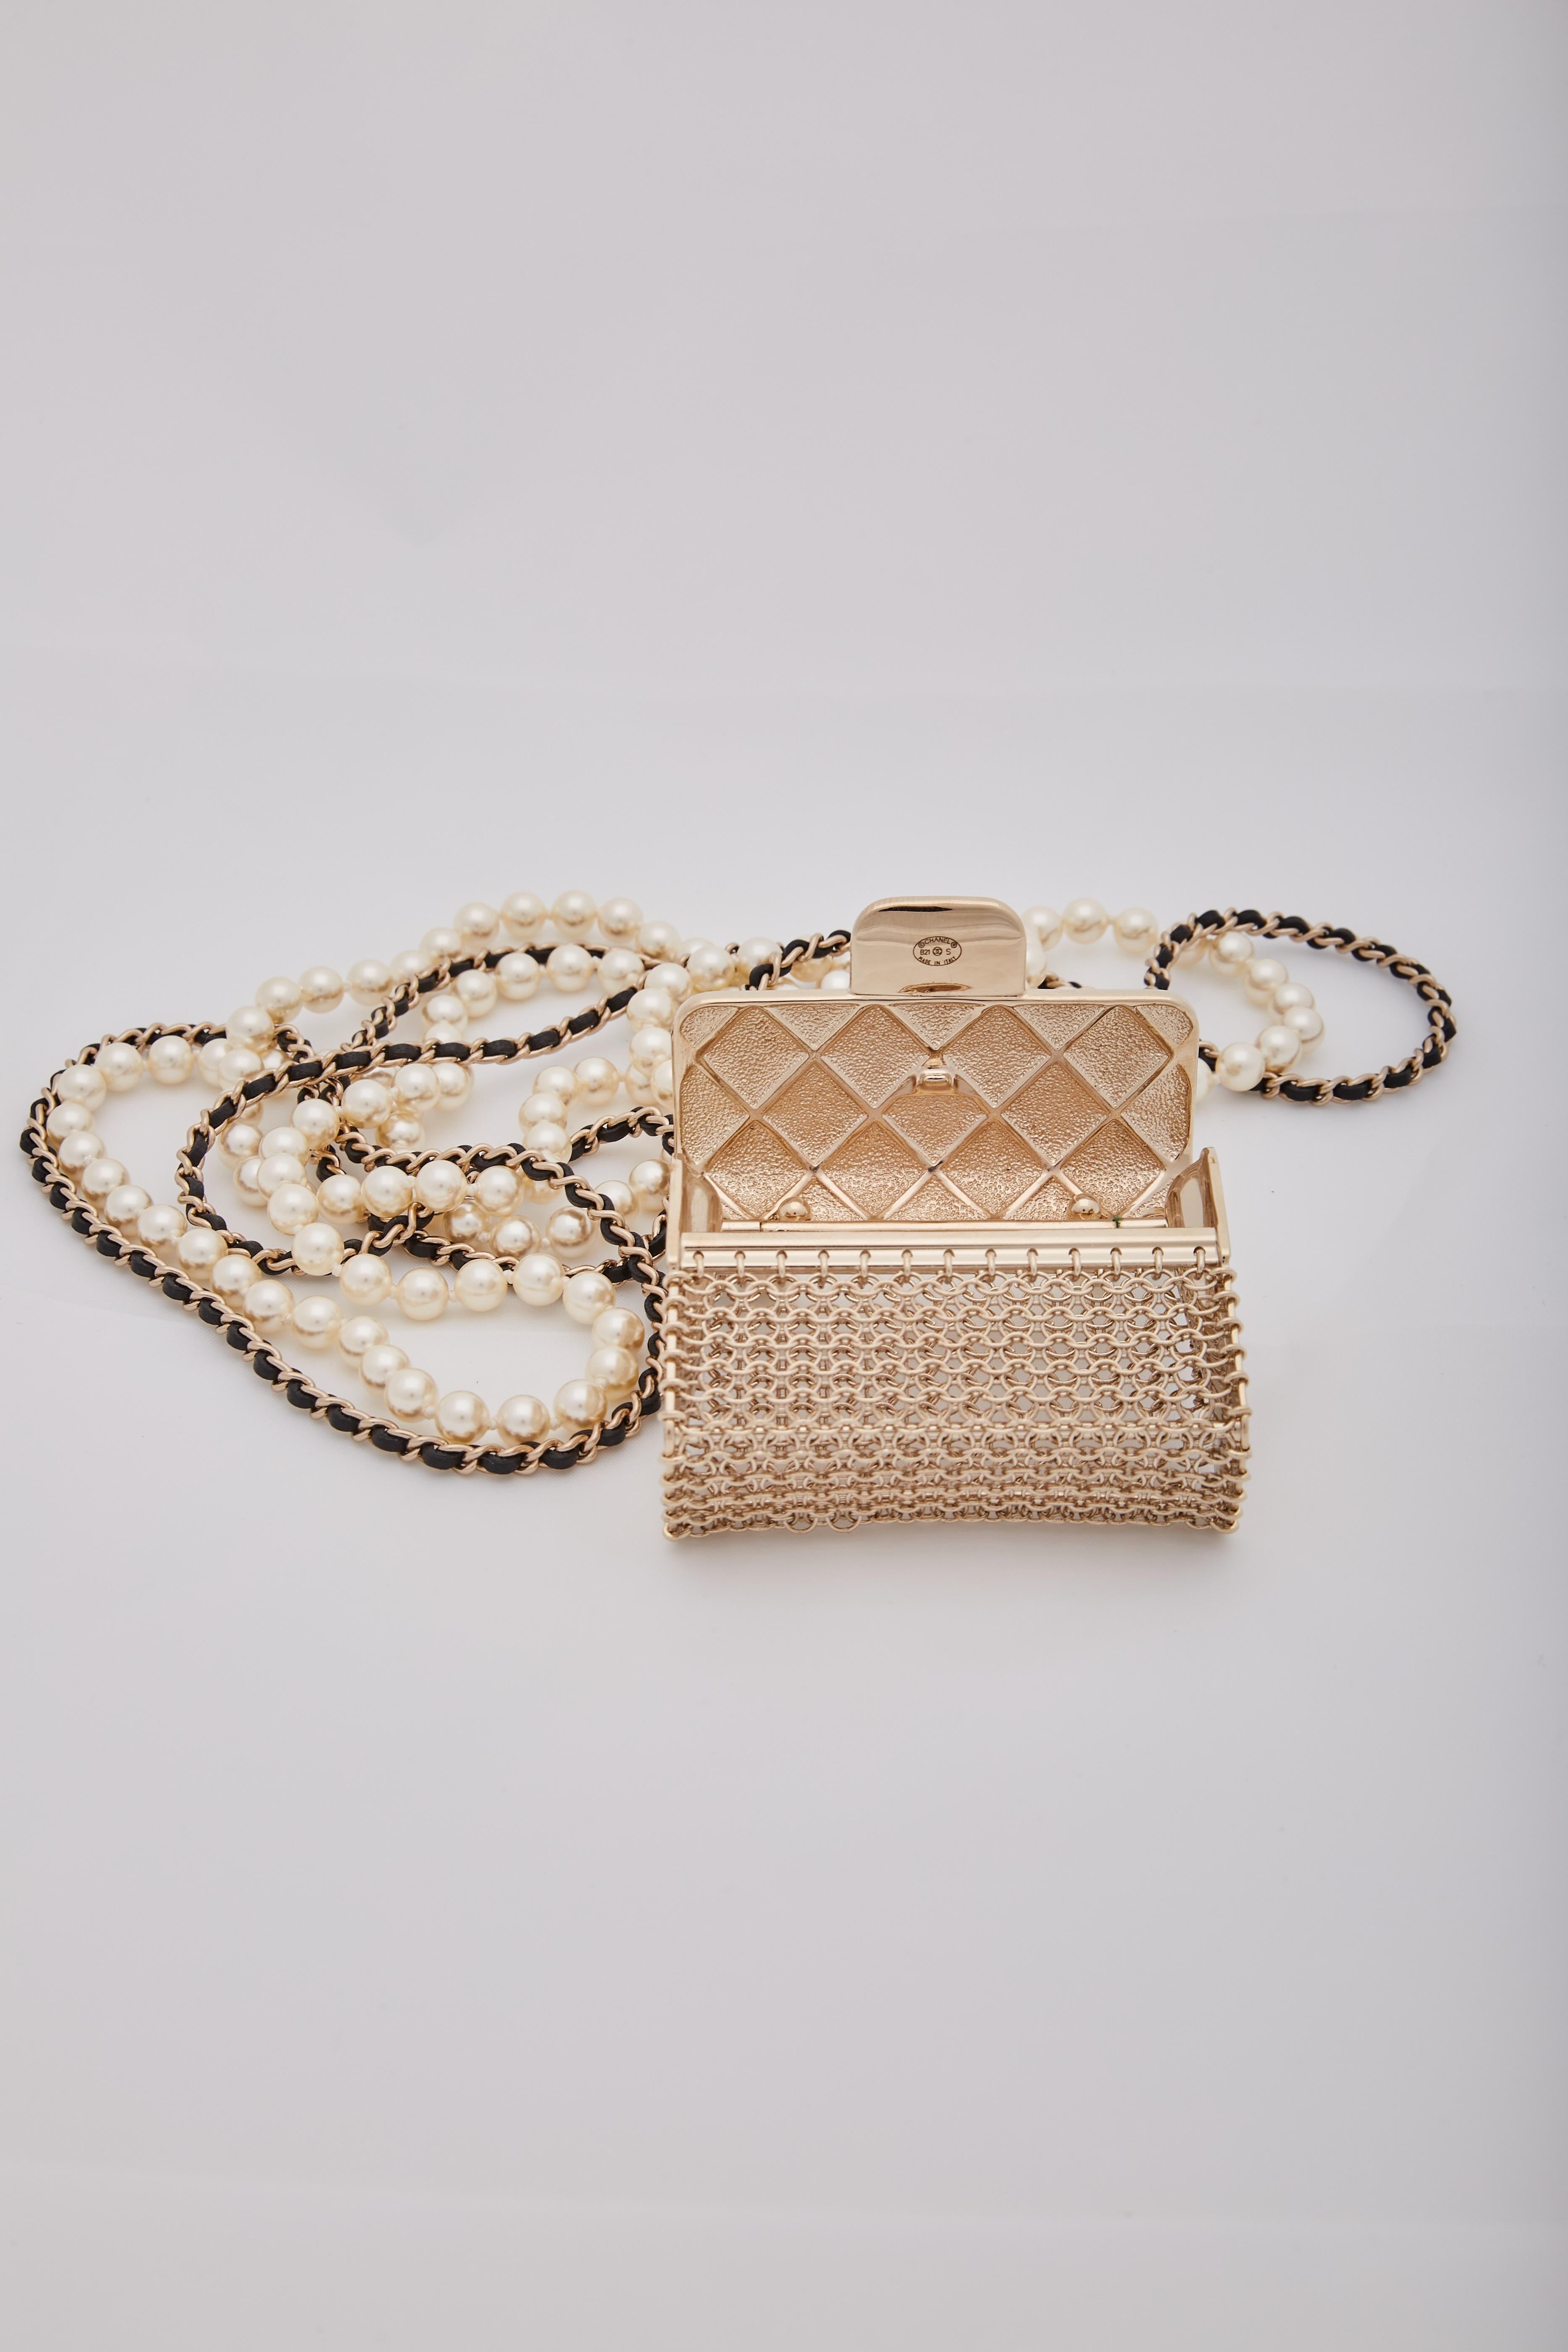 Chanel Gold Micro Flap Bag Pendant Pearls Long Crossbody Necklace For Sale 4